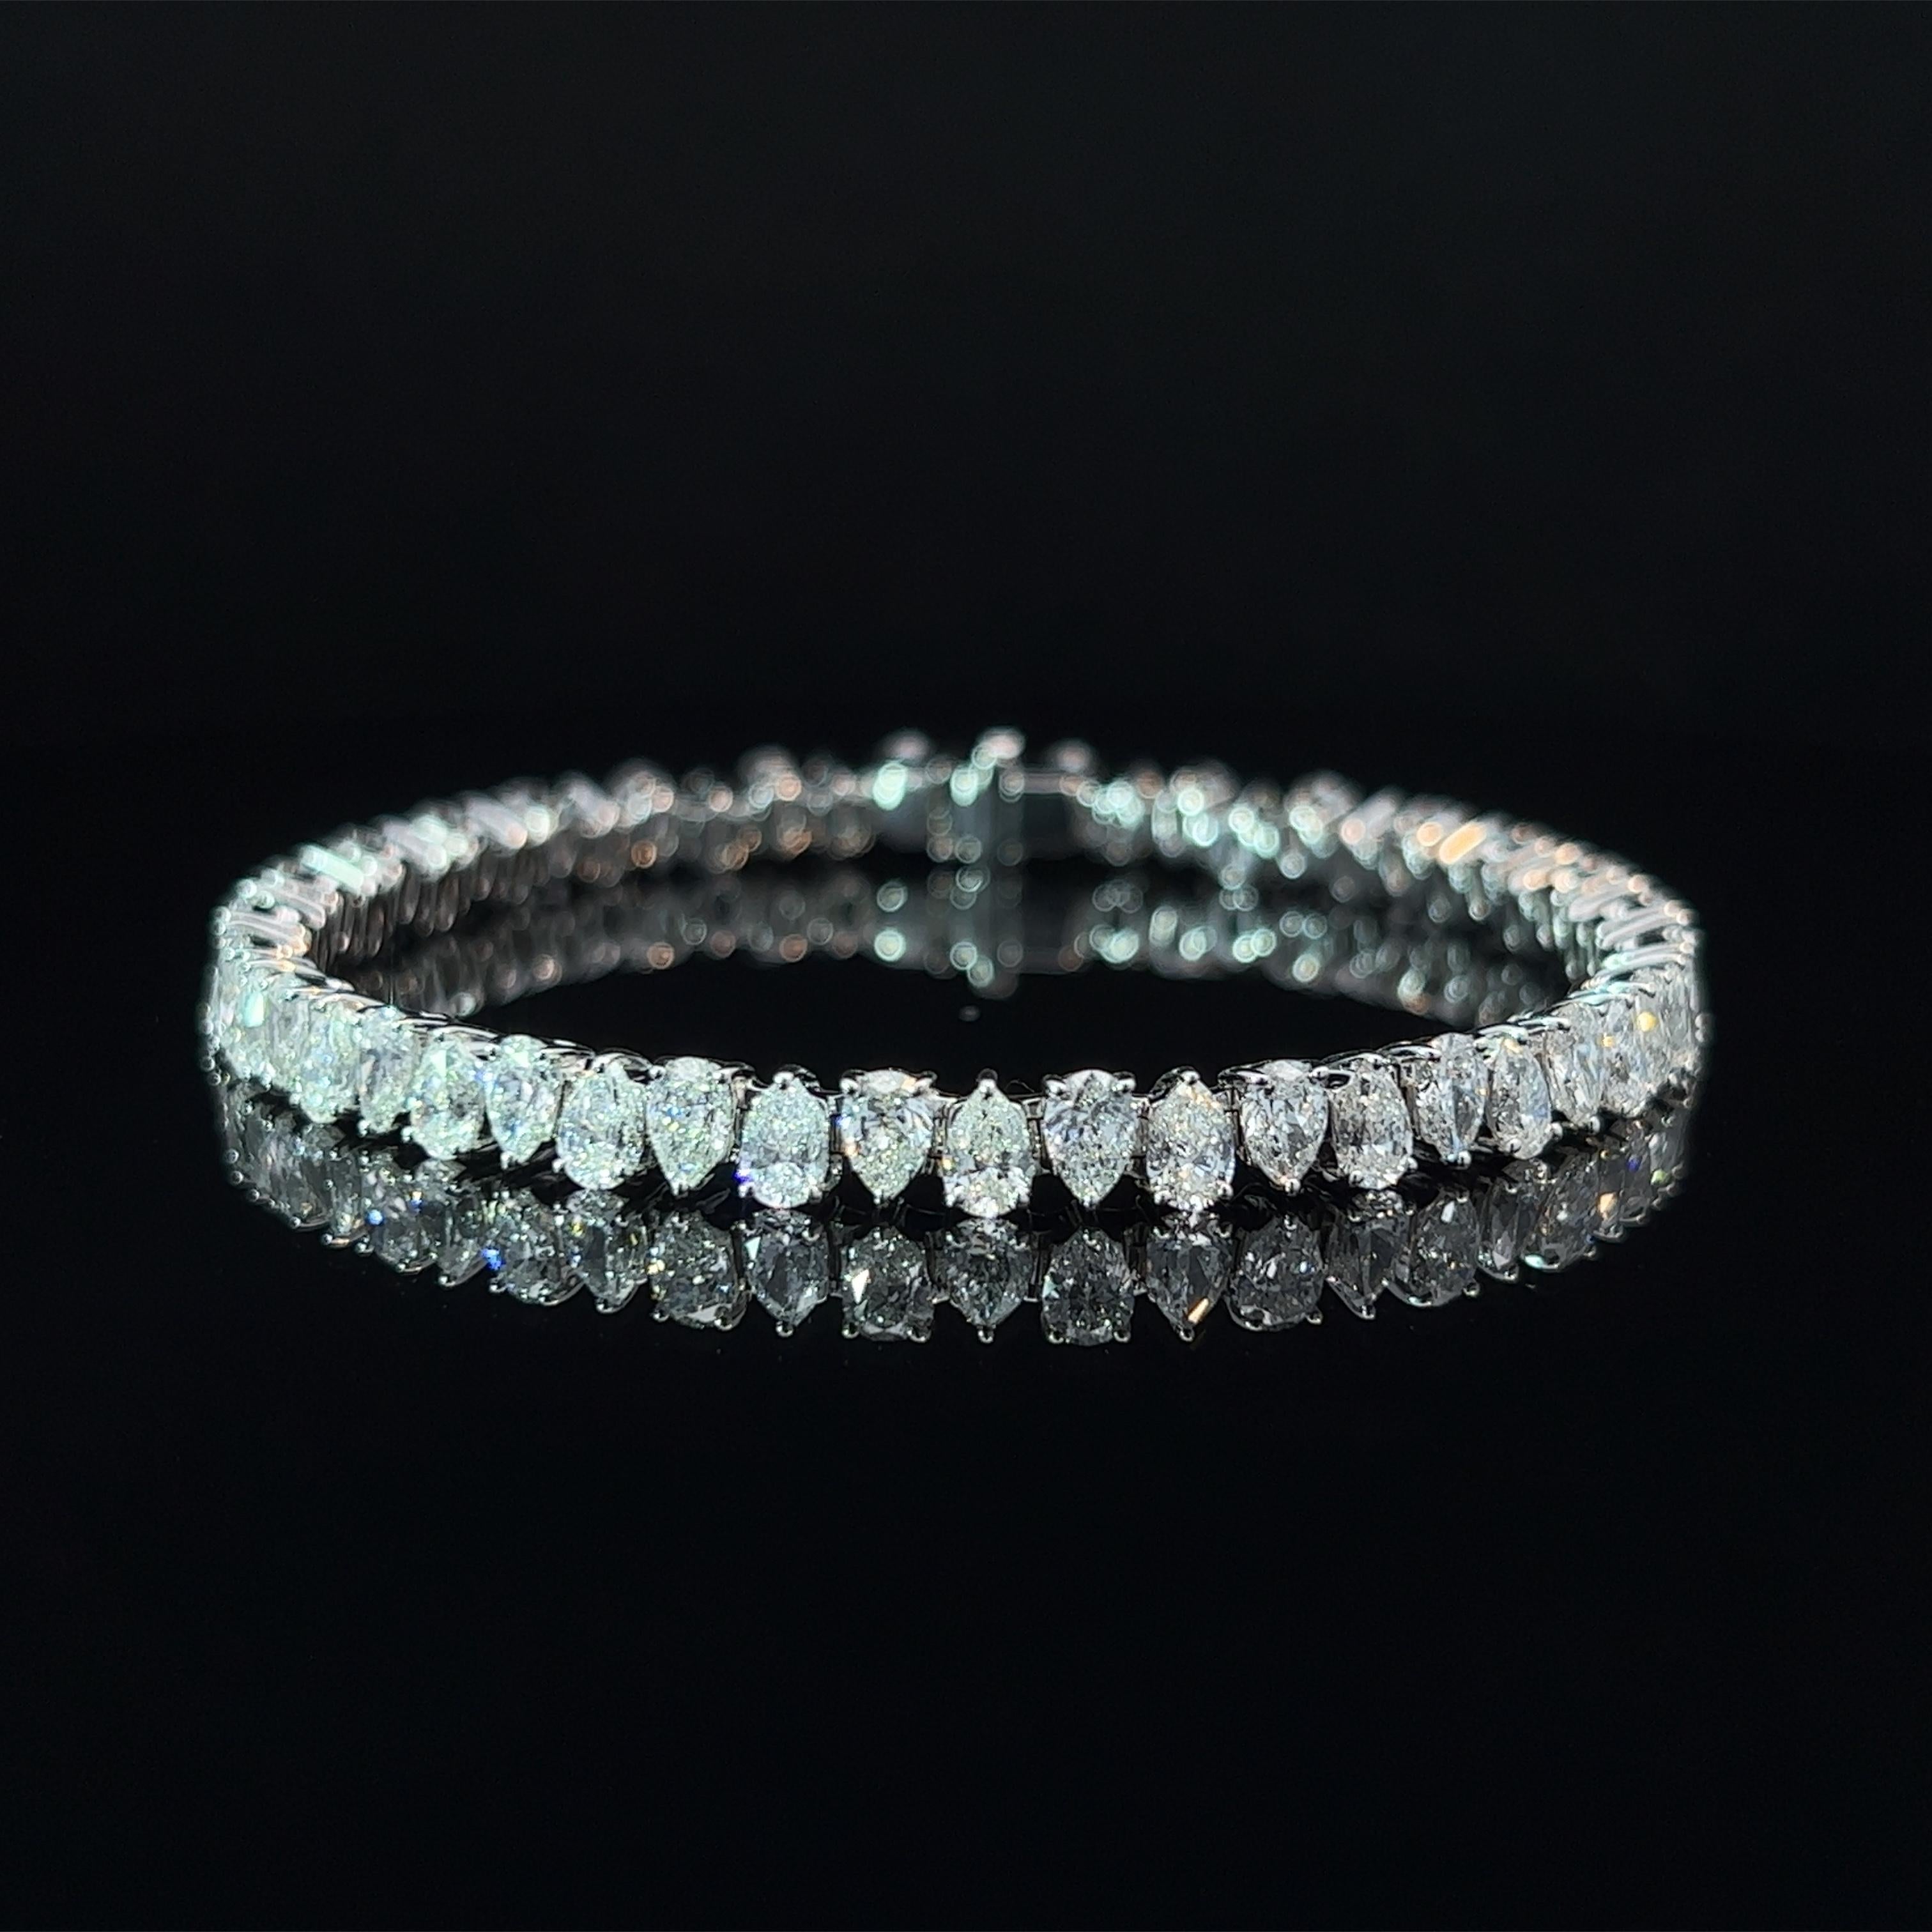 Diamond Shape: Pear Cut 
Total Diamond Weight: 10.18ct
Individual Diamond Weight: .20ct
Color/Clarity: FG VVS 
Metal: 18K White Gold  
Metal Weight: 18.19g 

Key Features:

Pear-Cut Diamonds: The centerpiece of this bracelet showcases a dazzling